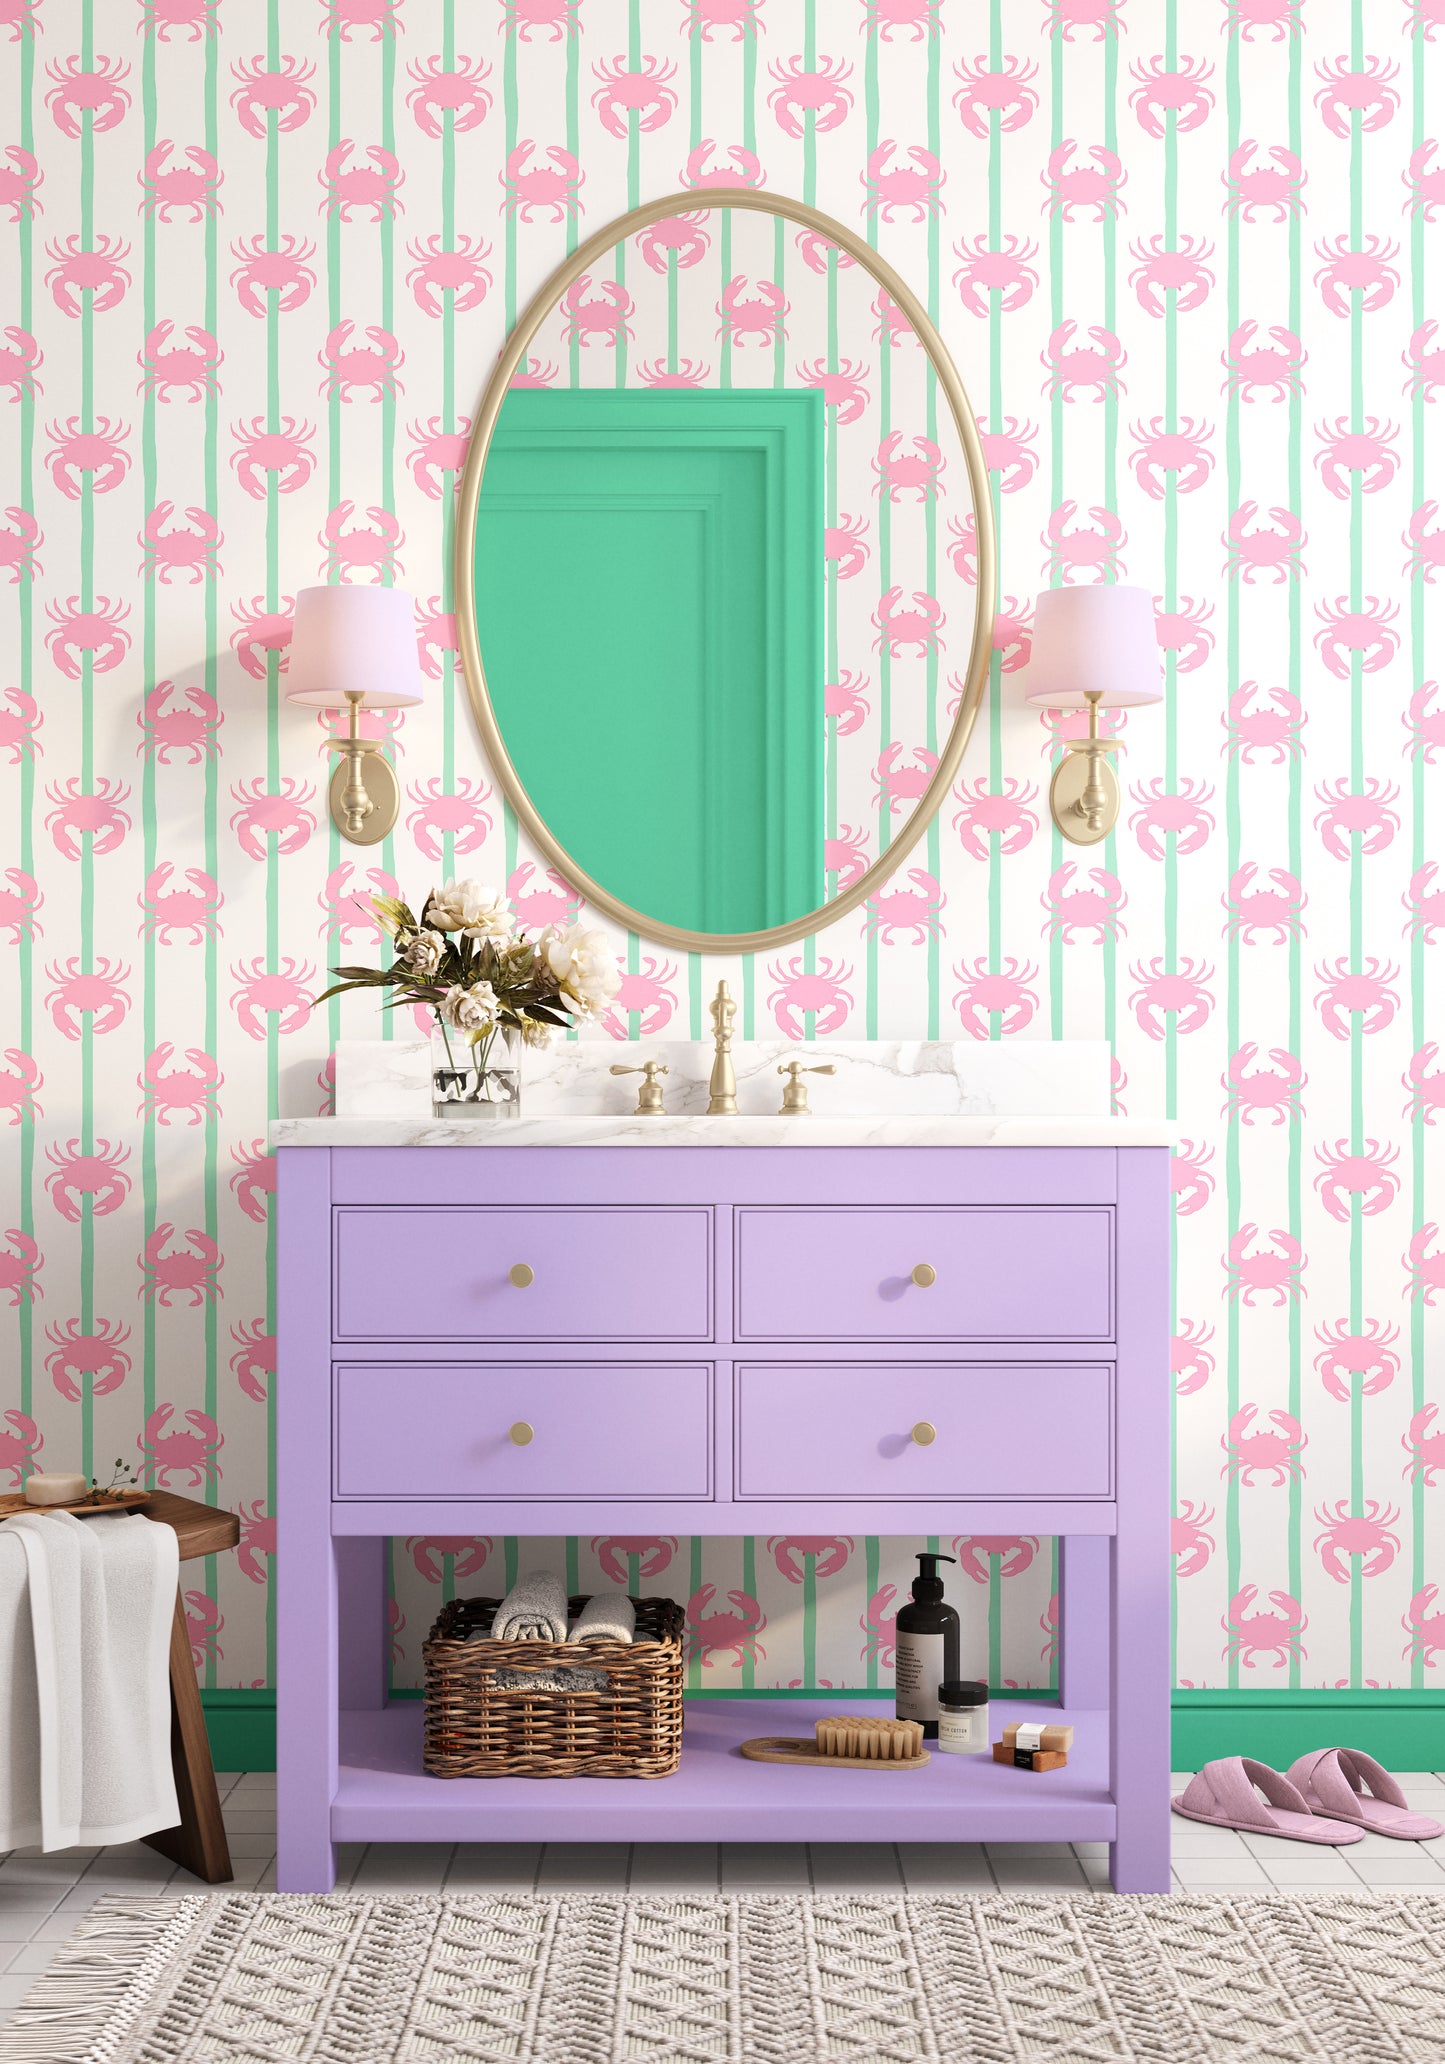 ‘Don’t Be Crabby’ Crabs Wallpaper in Pink with Mint Green stripes | Crabs wallpaper in pink and green